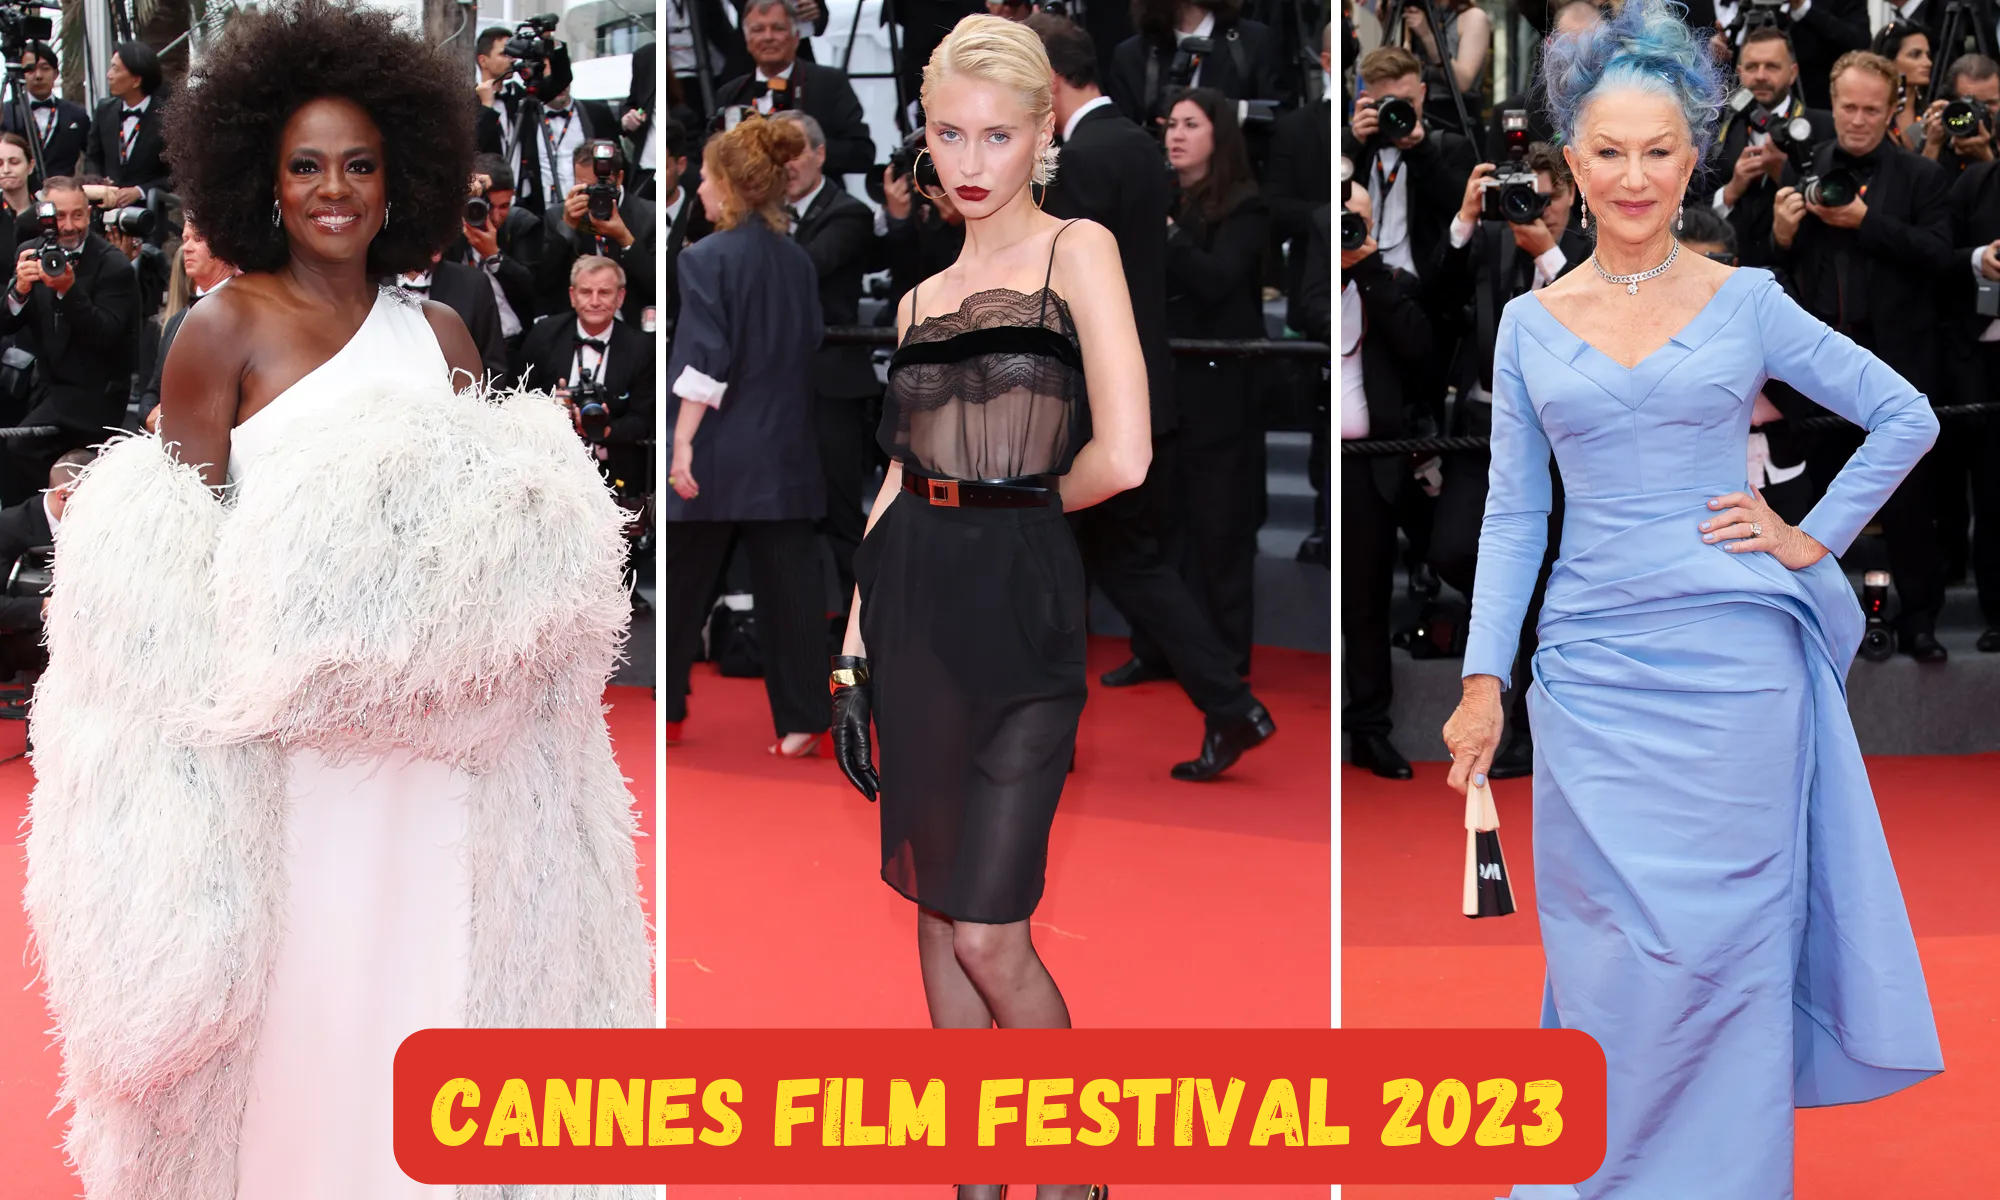 Cannes Film festival 2023: Date, Schedule, Winners and Location_40.1